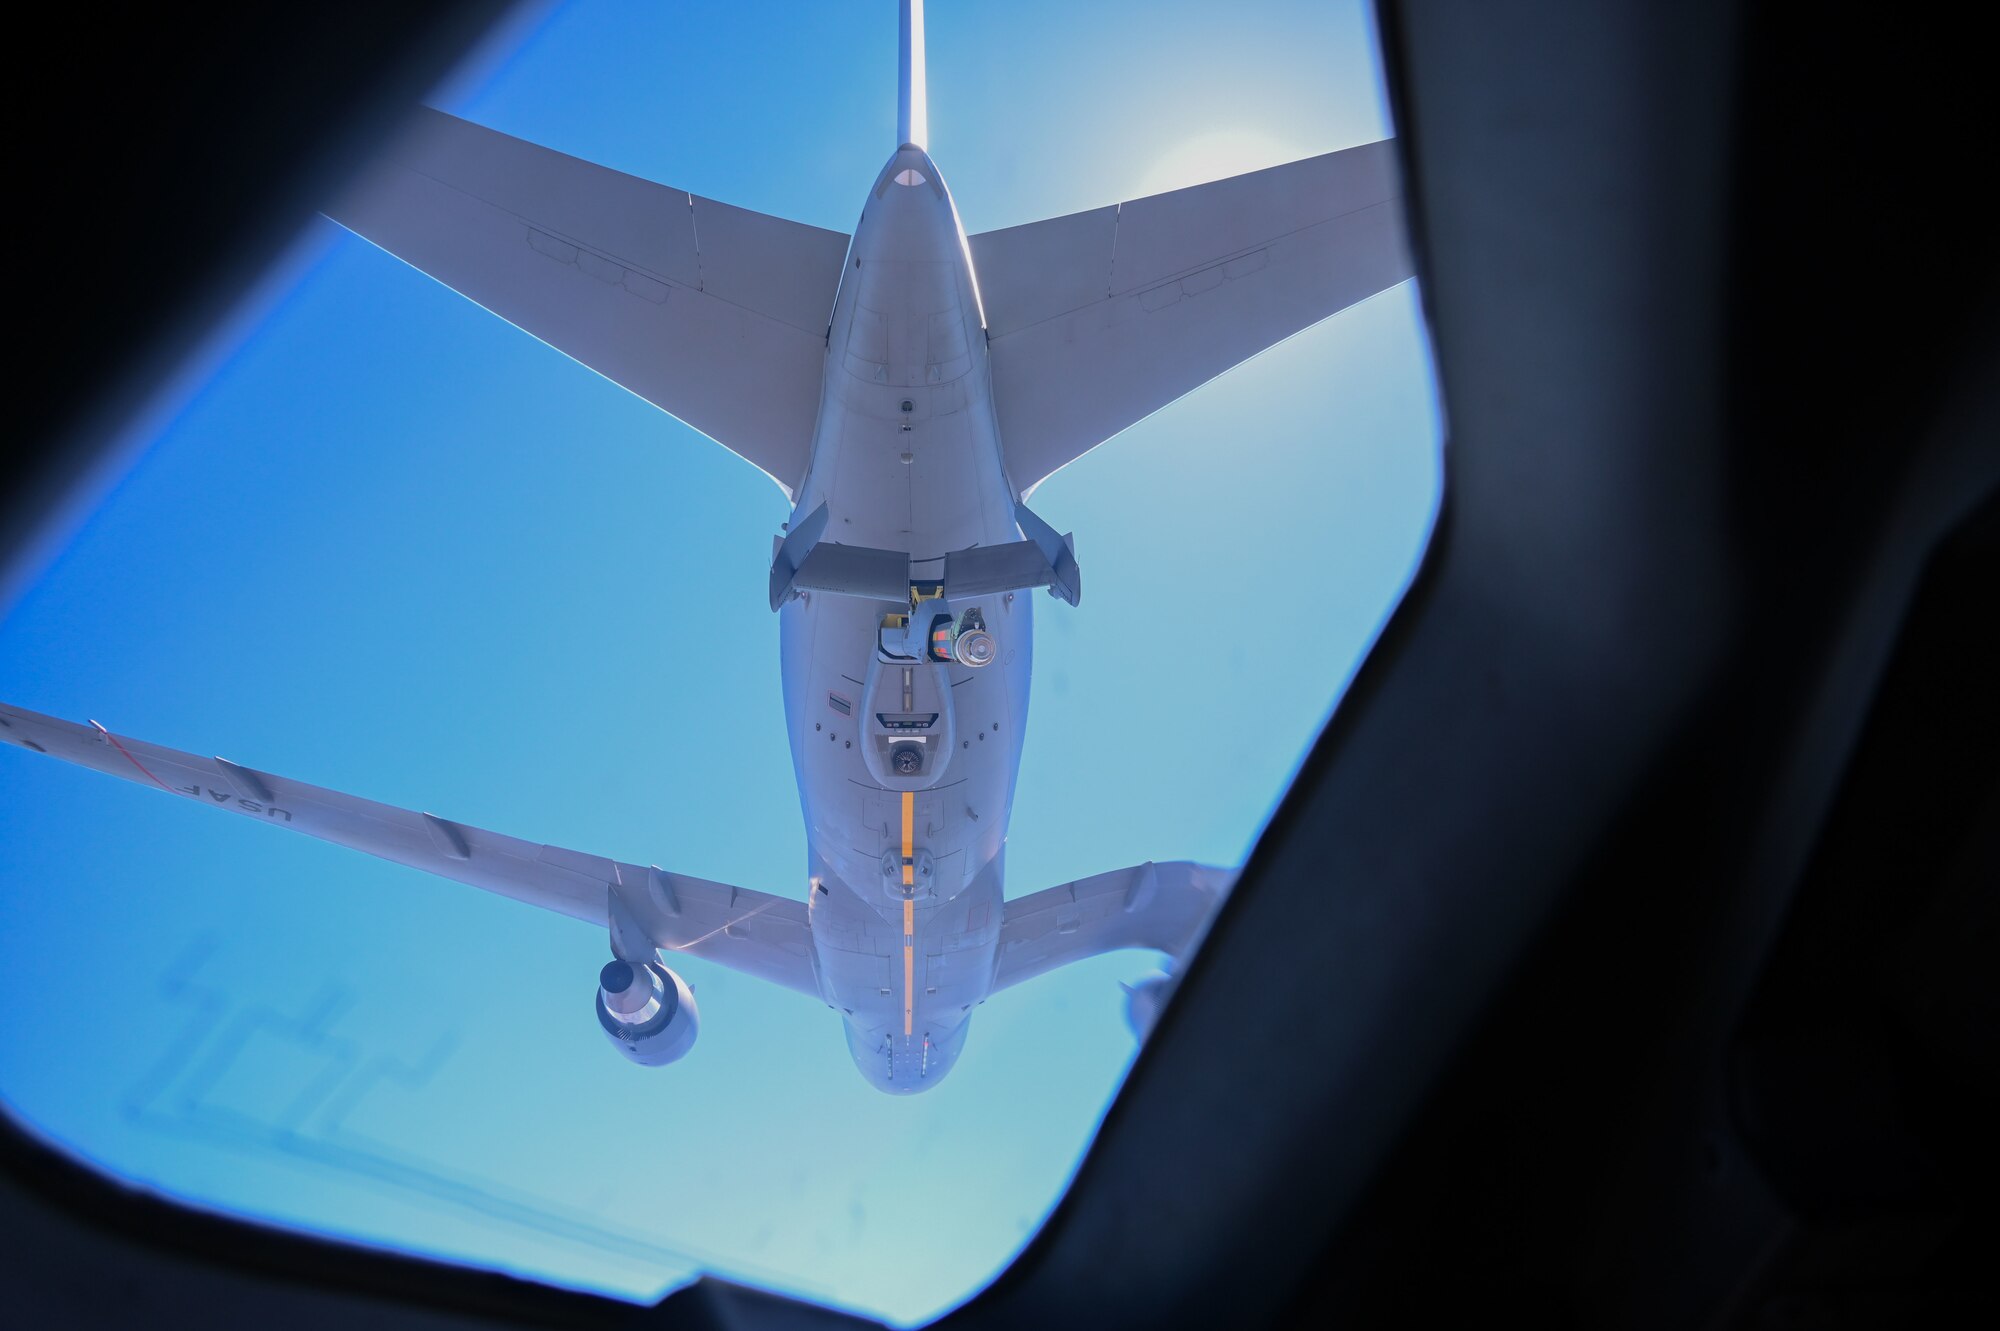 A C-17 Globemaster flown by the 730th Air Mobility Training Squadron, Altus Air Force Base, Oklahoma refuels with a KC-46 Pegasus March 4, 2021. (U.S. Air Force photo by Senior Airman Mary Begy)